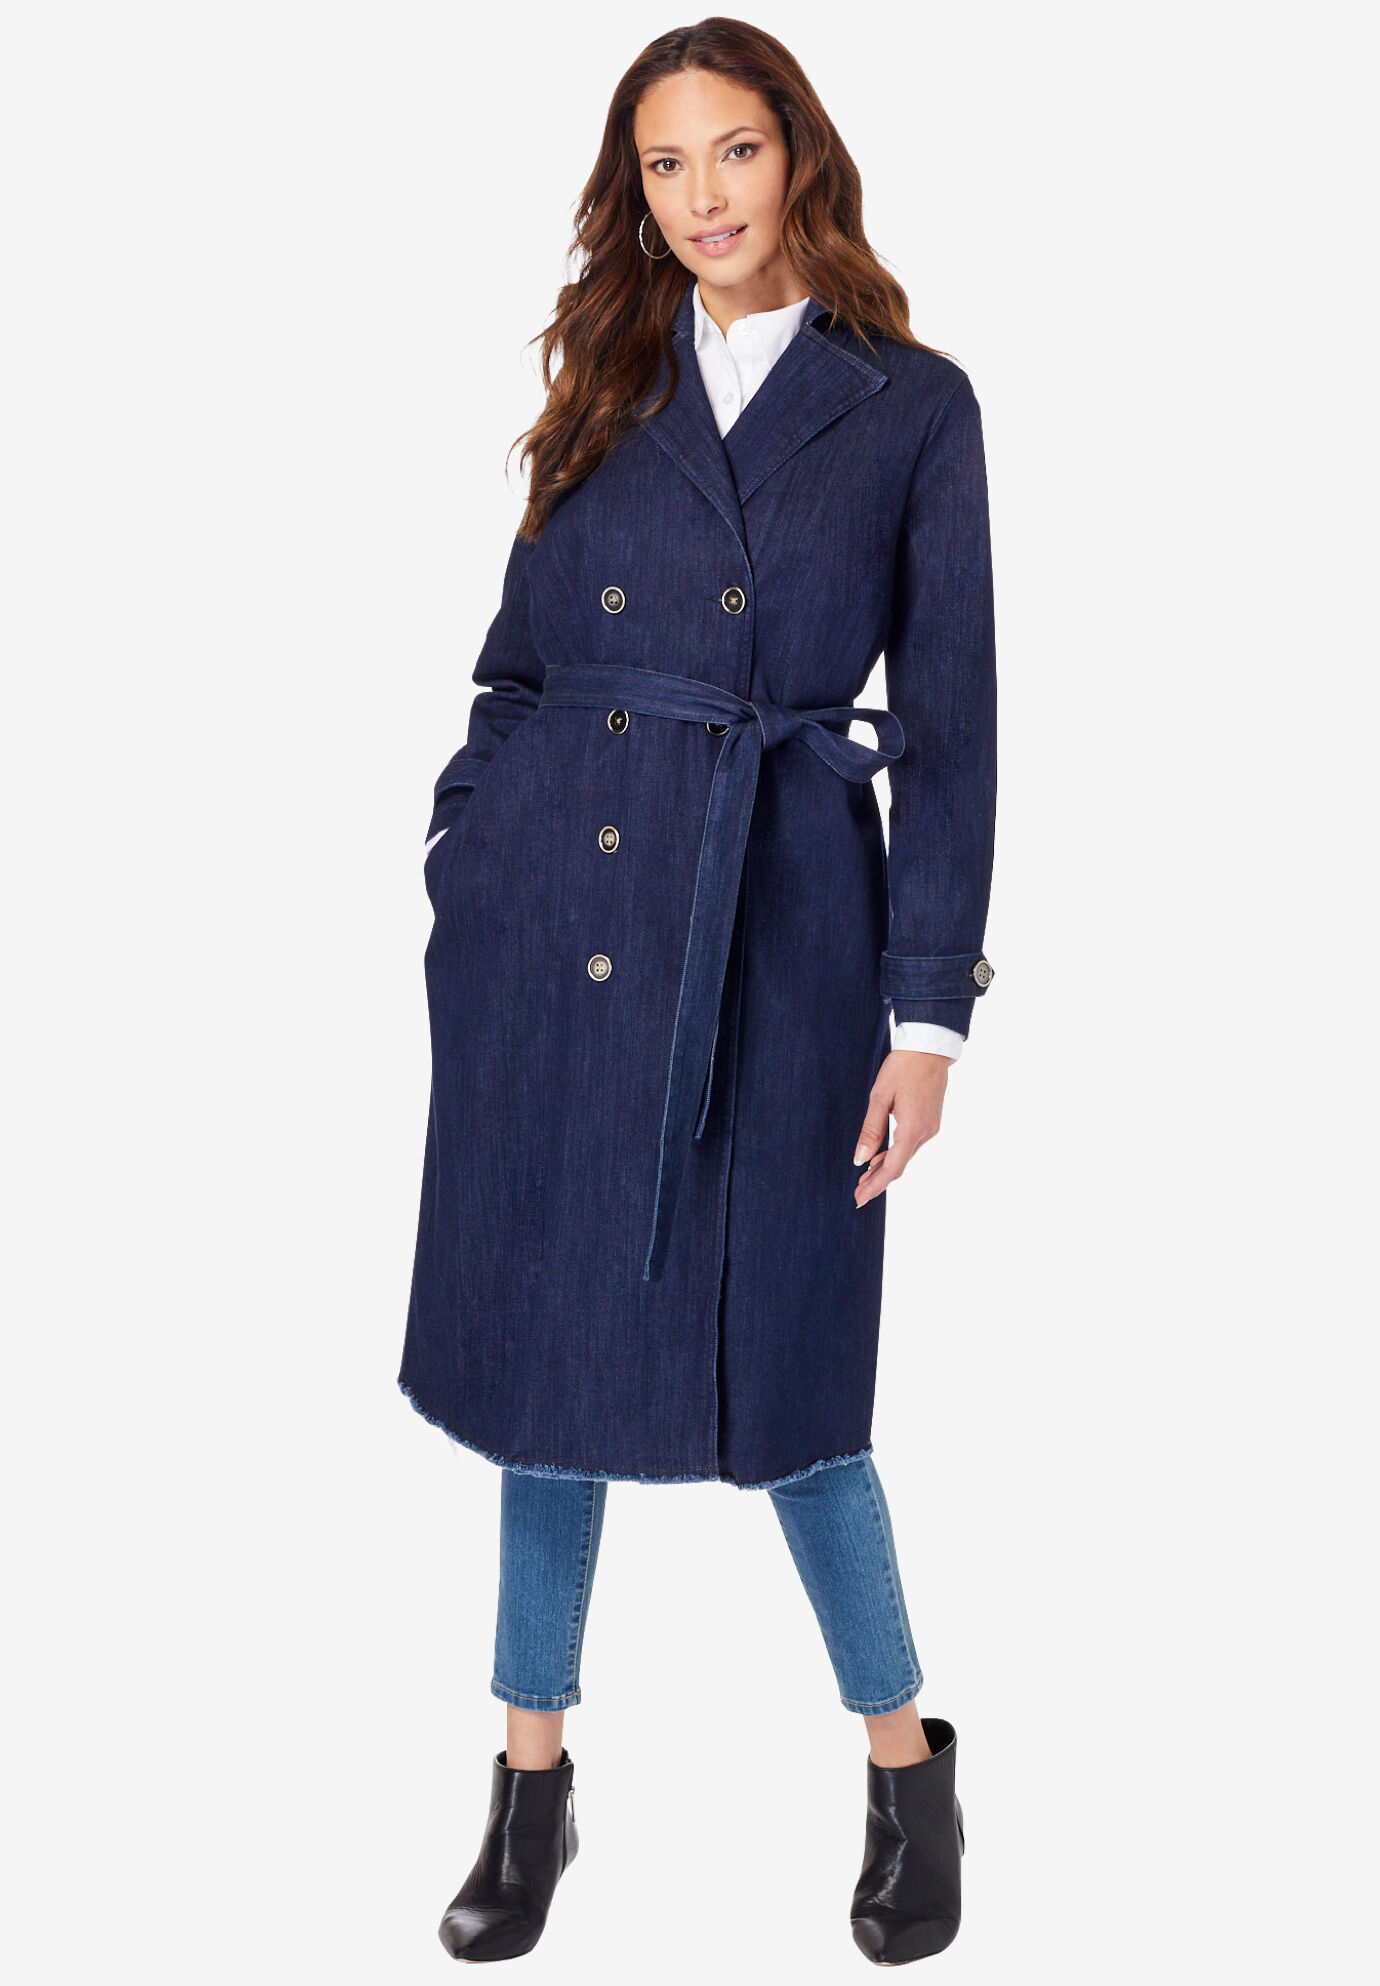 Black Roaman's Women's Plus Size Essential Trench Coat Double Breasted Raincoat 18 W 